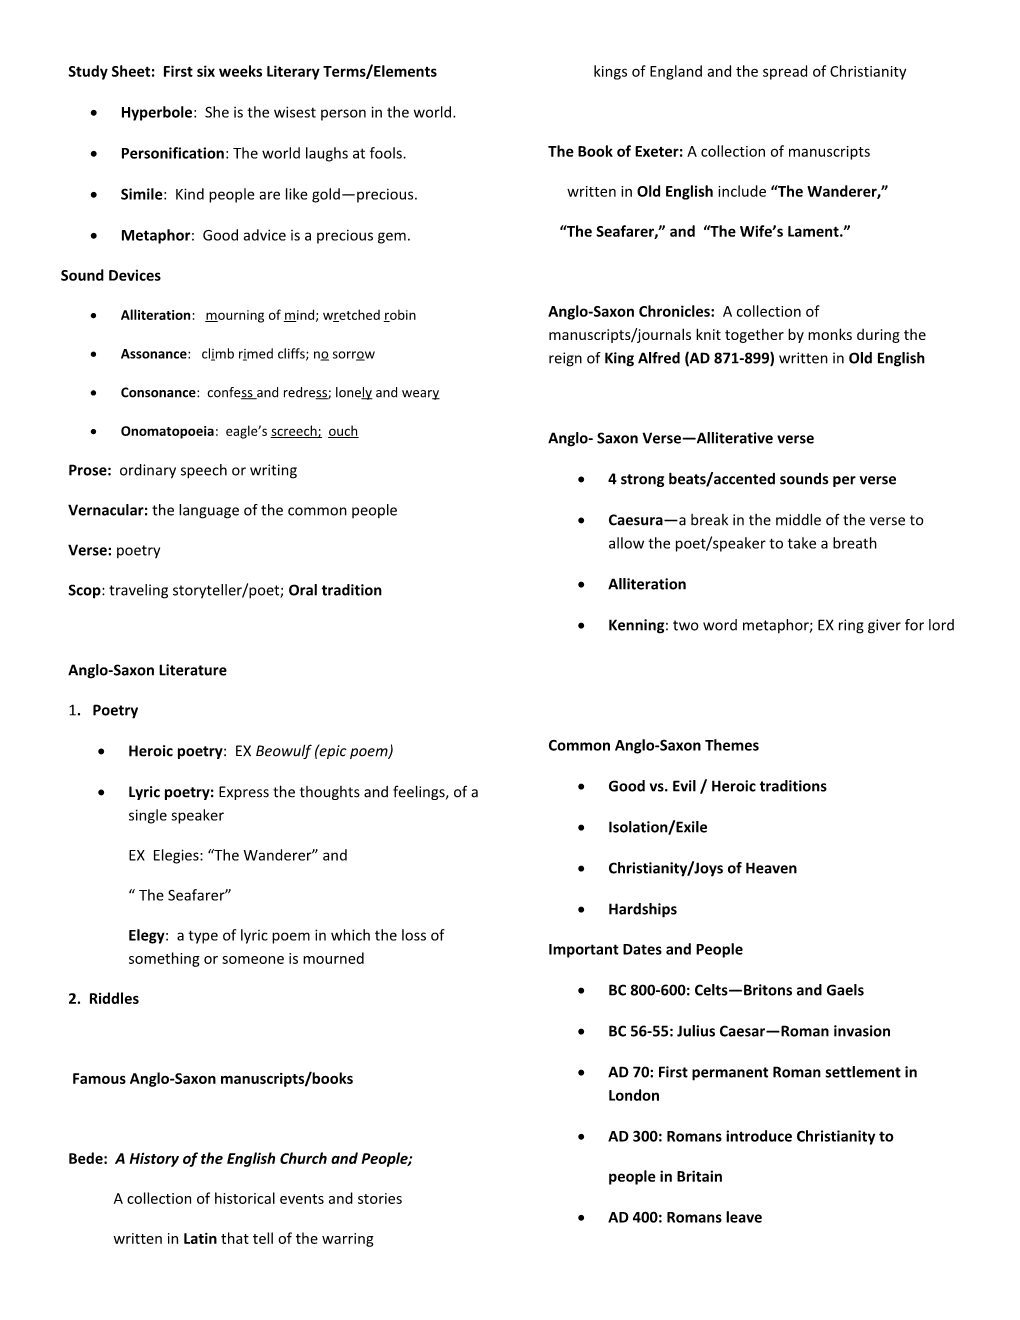 Study Sheet: First Six Weeks Literary Terms/Elements